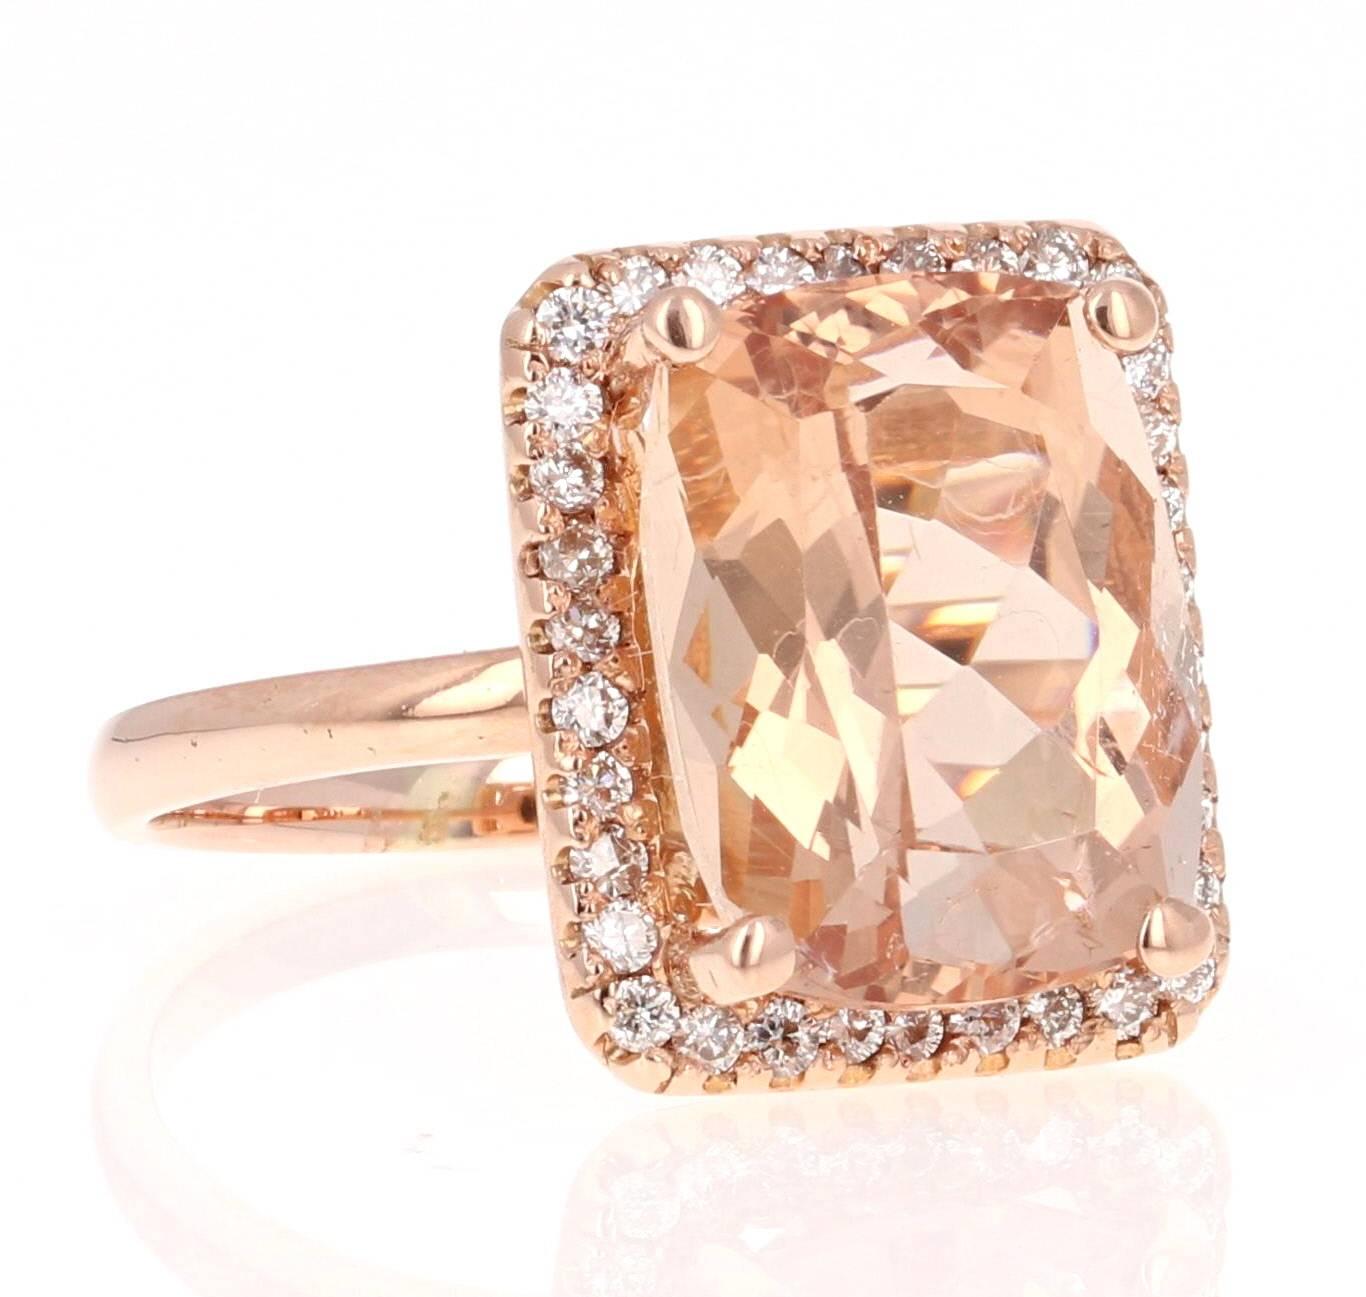 This classic Morganite Ring has a large Cushion Cut 7.44 Carat Morganite as its center and is surrounded by a halo of 34 Round Cut Diamonds that weigh 0.42 Carats. The clarity and color of the Diamonds are VS-F.   The total Carat Weight of the ring